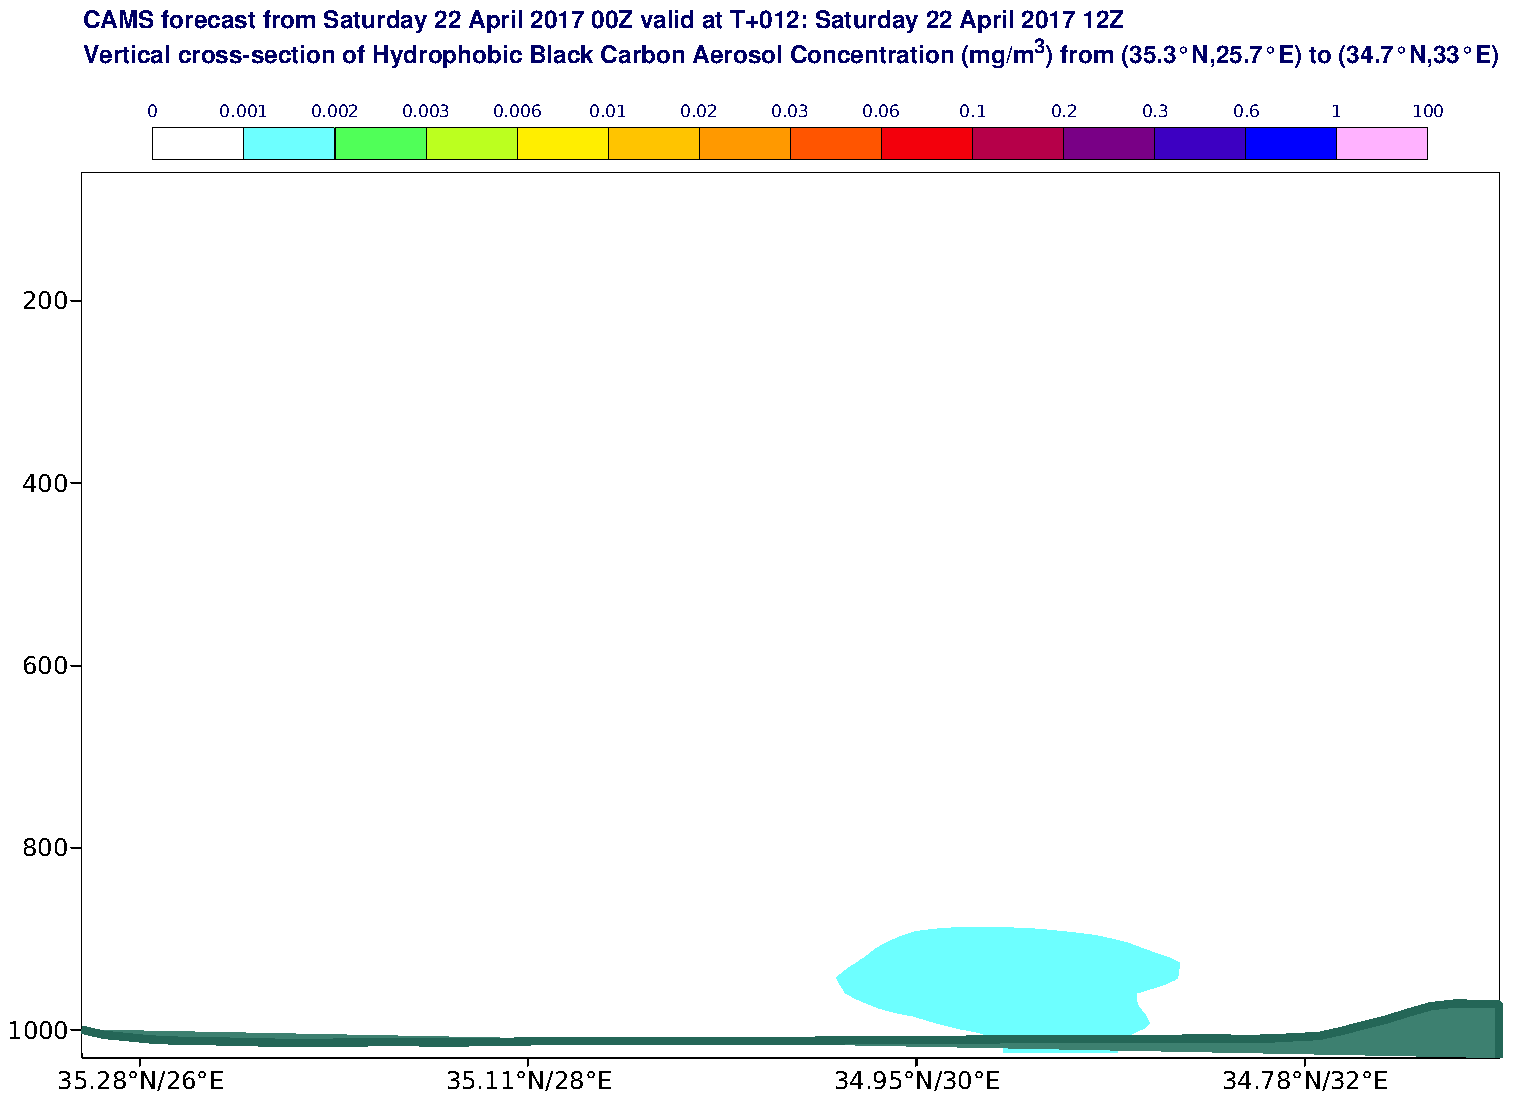 Vertical cross-section of Hydrophobic Black Carbon Aerosol Concentration (mg/m3) valid at T12 - 2017-04-22 12:00